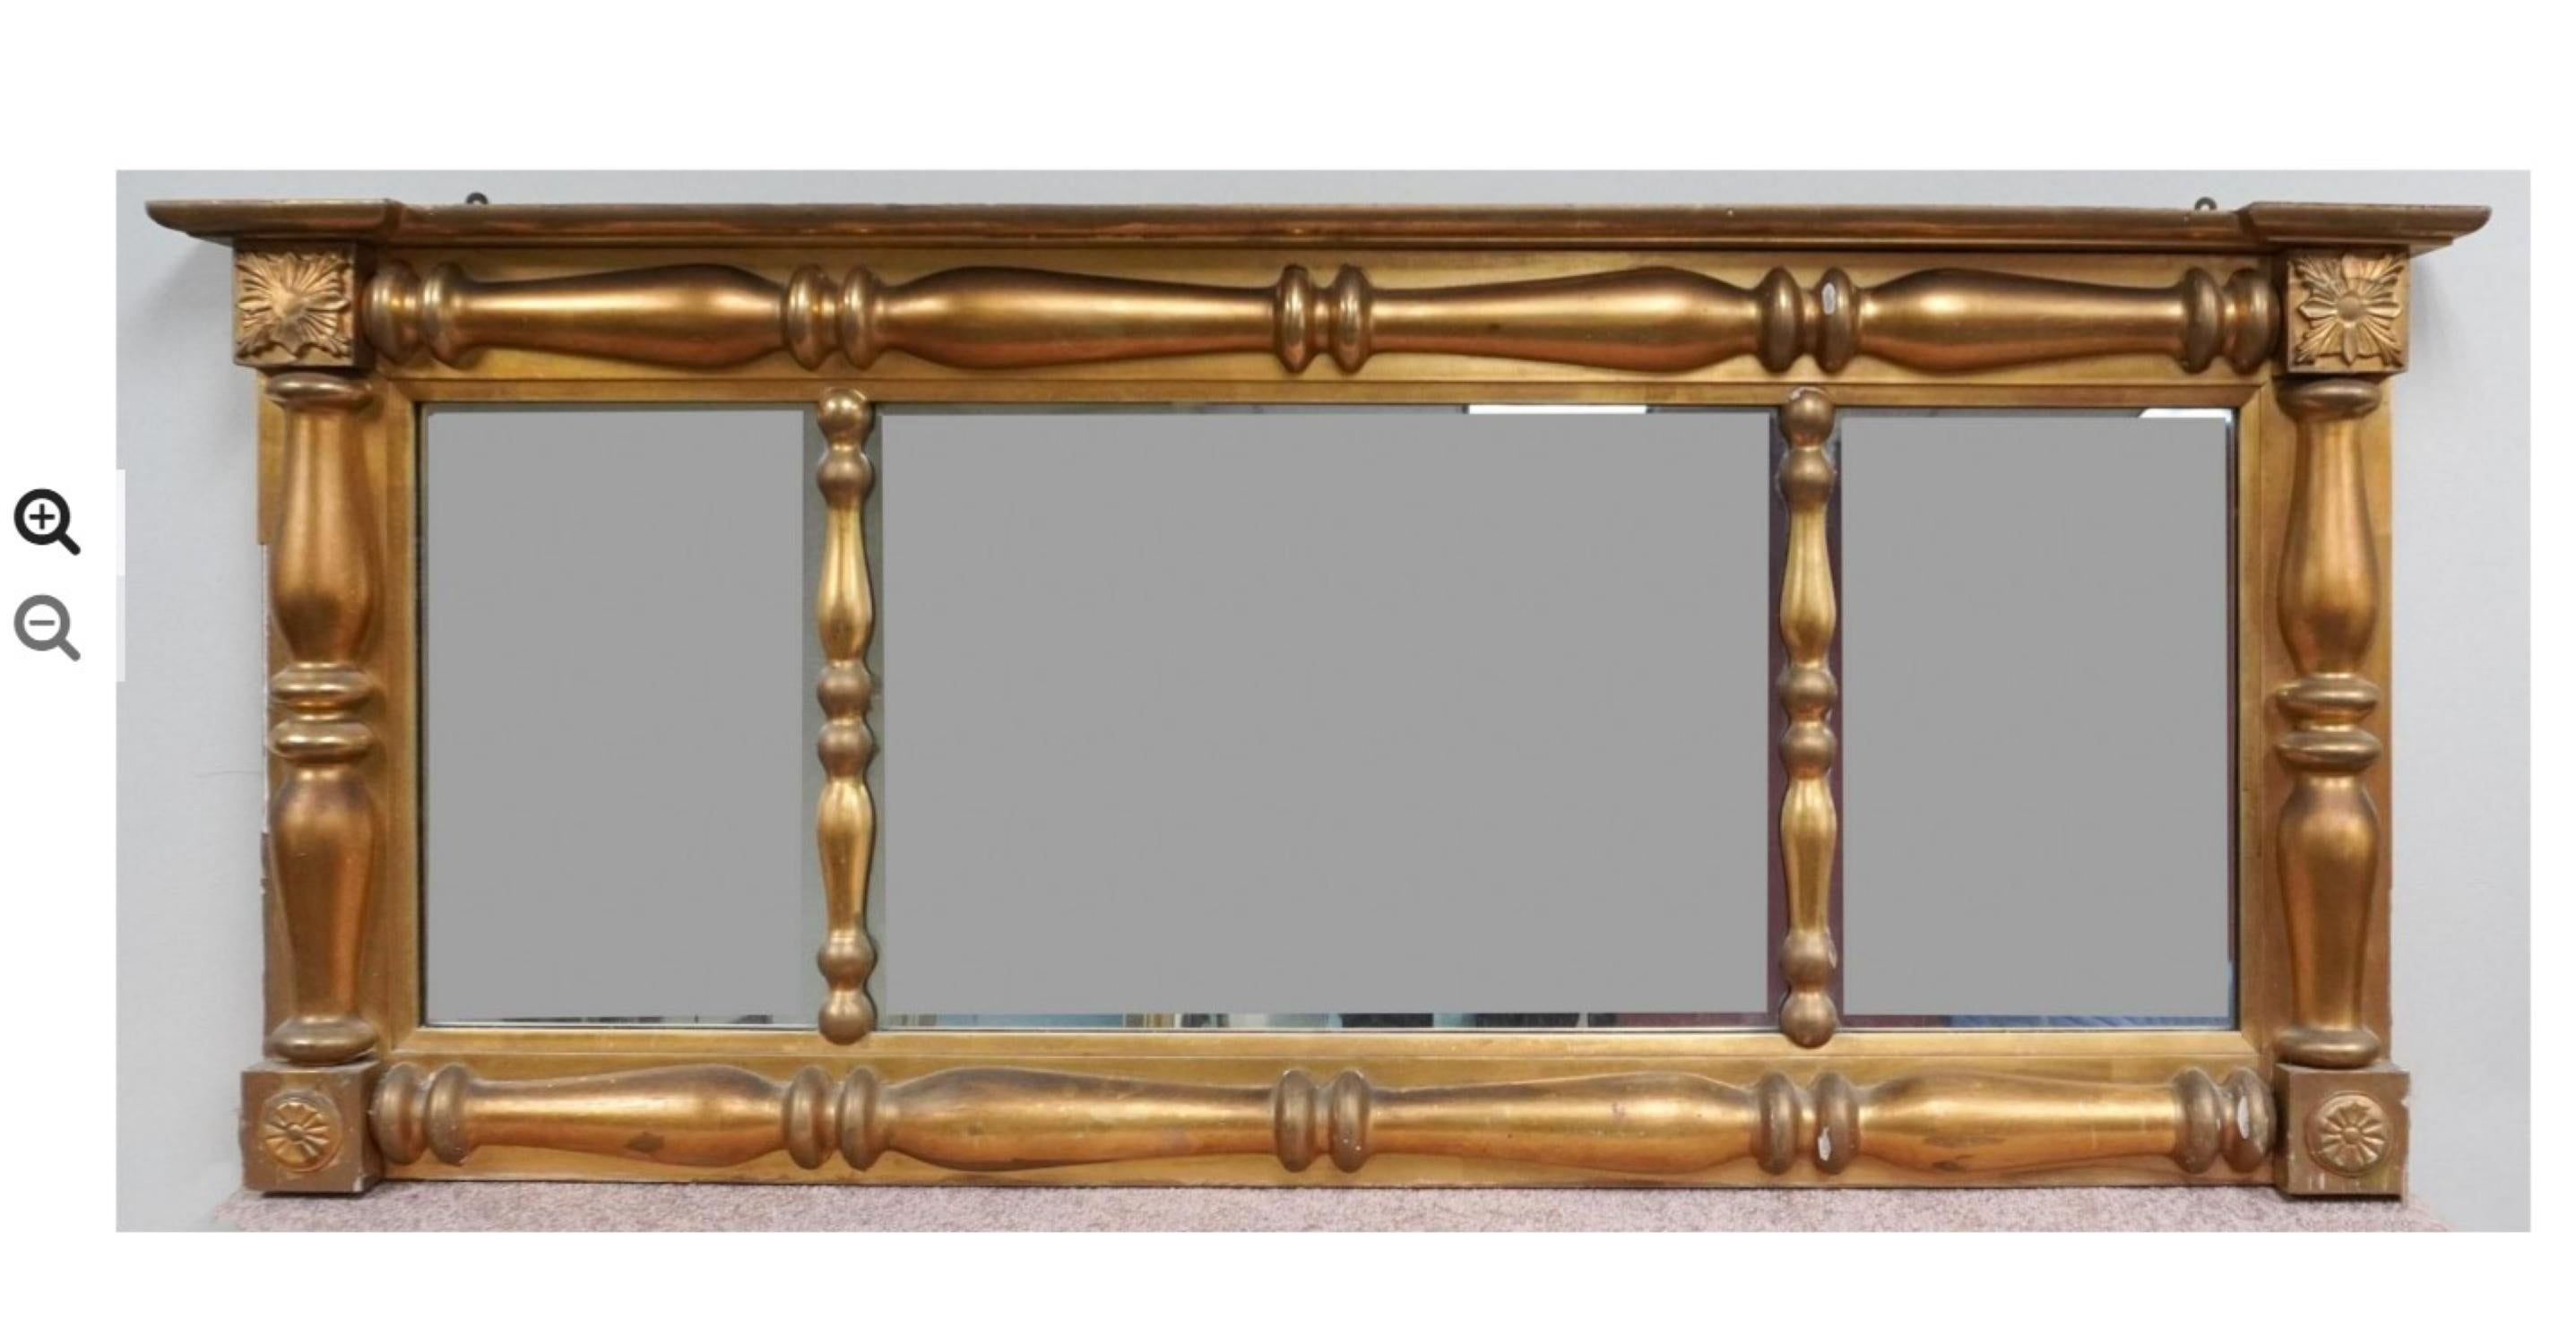 A large, Late 19th Century Georgian Style Gilt Decorated Large 3-panel Over Mantle Mirror.
Measures 62 inches in width, 27 inches in height and 4 inches in depth. 